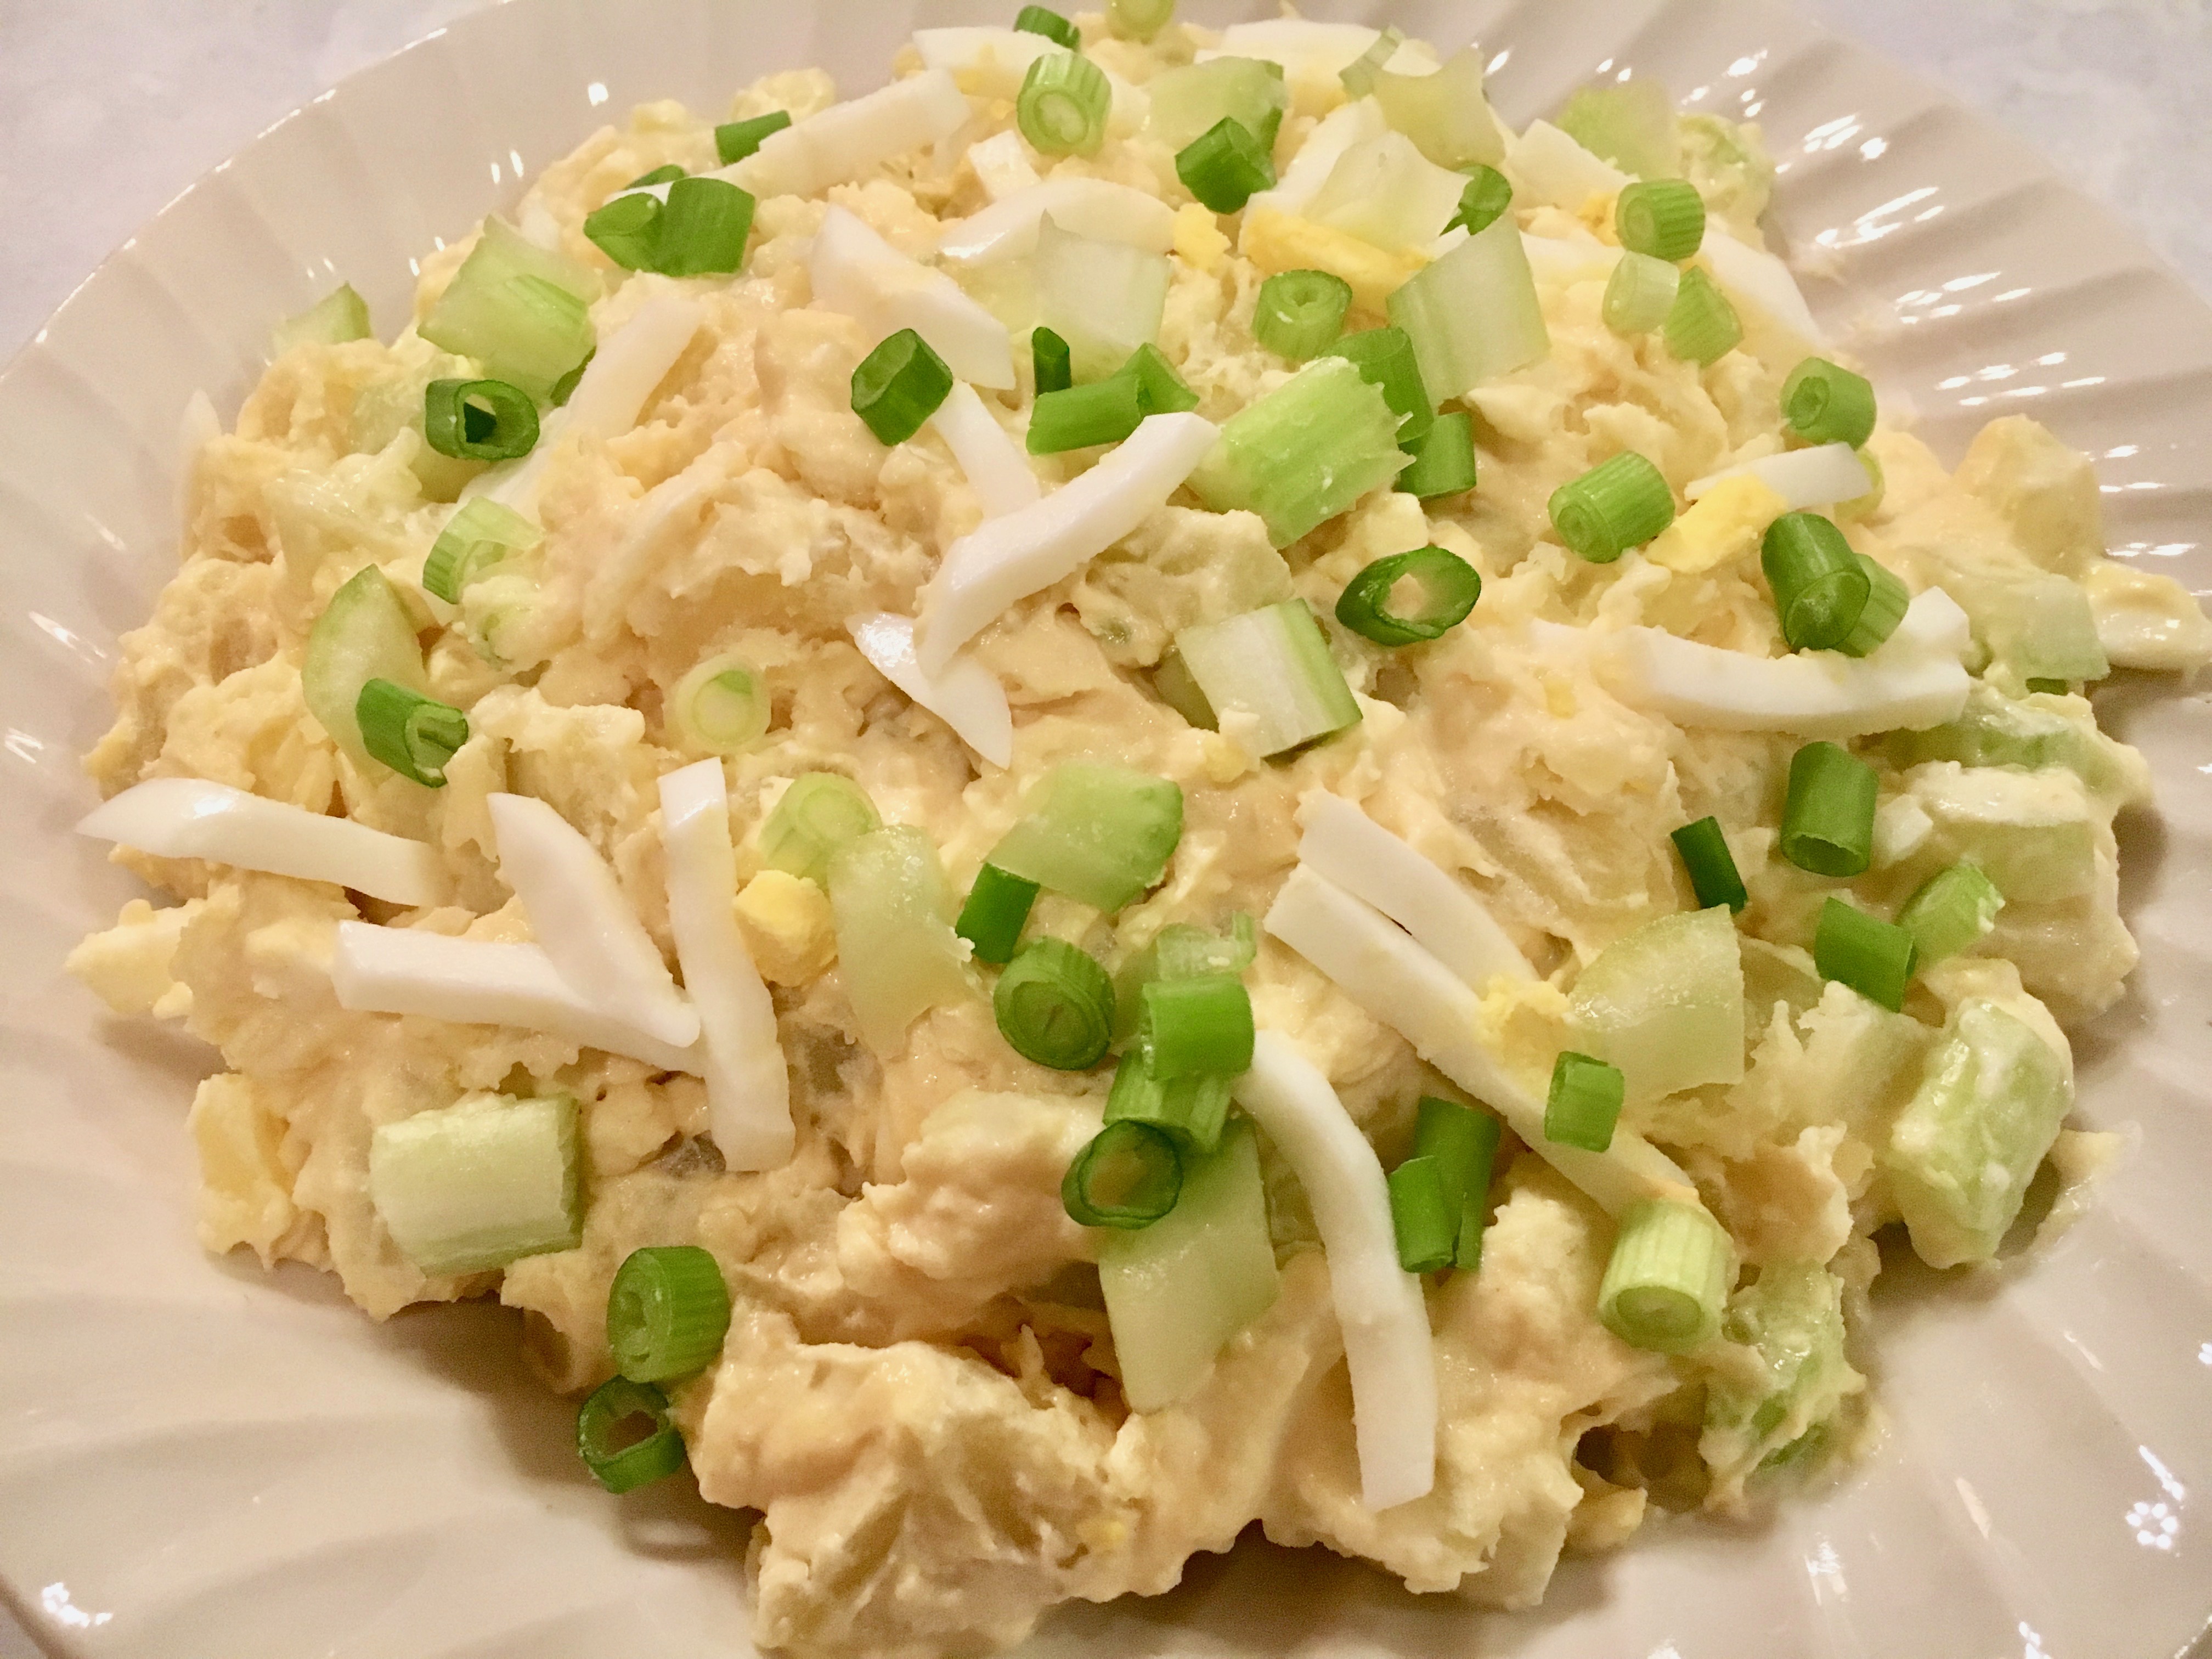 This Easy No Mayo Potato Salad Recipe is will become a favorite at your next picnic, BBQ or potluck. This potato salad is elevated by the spicy addition of Dijon mustard. Sour cream replaces the mayonnaise and the addition of egg, celery, green onions and dill pickle make this a zesty potato salad worthy of your next gathering.